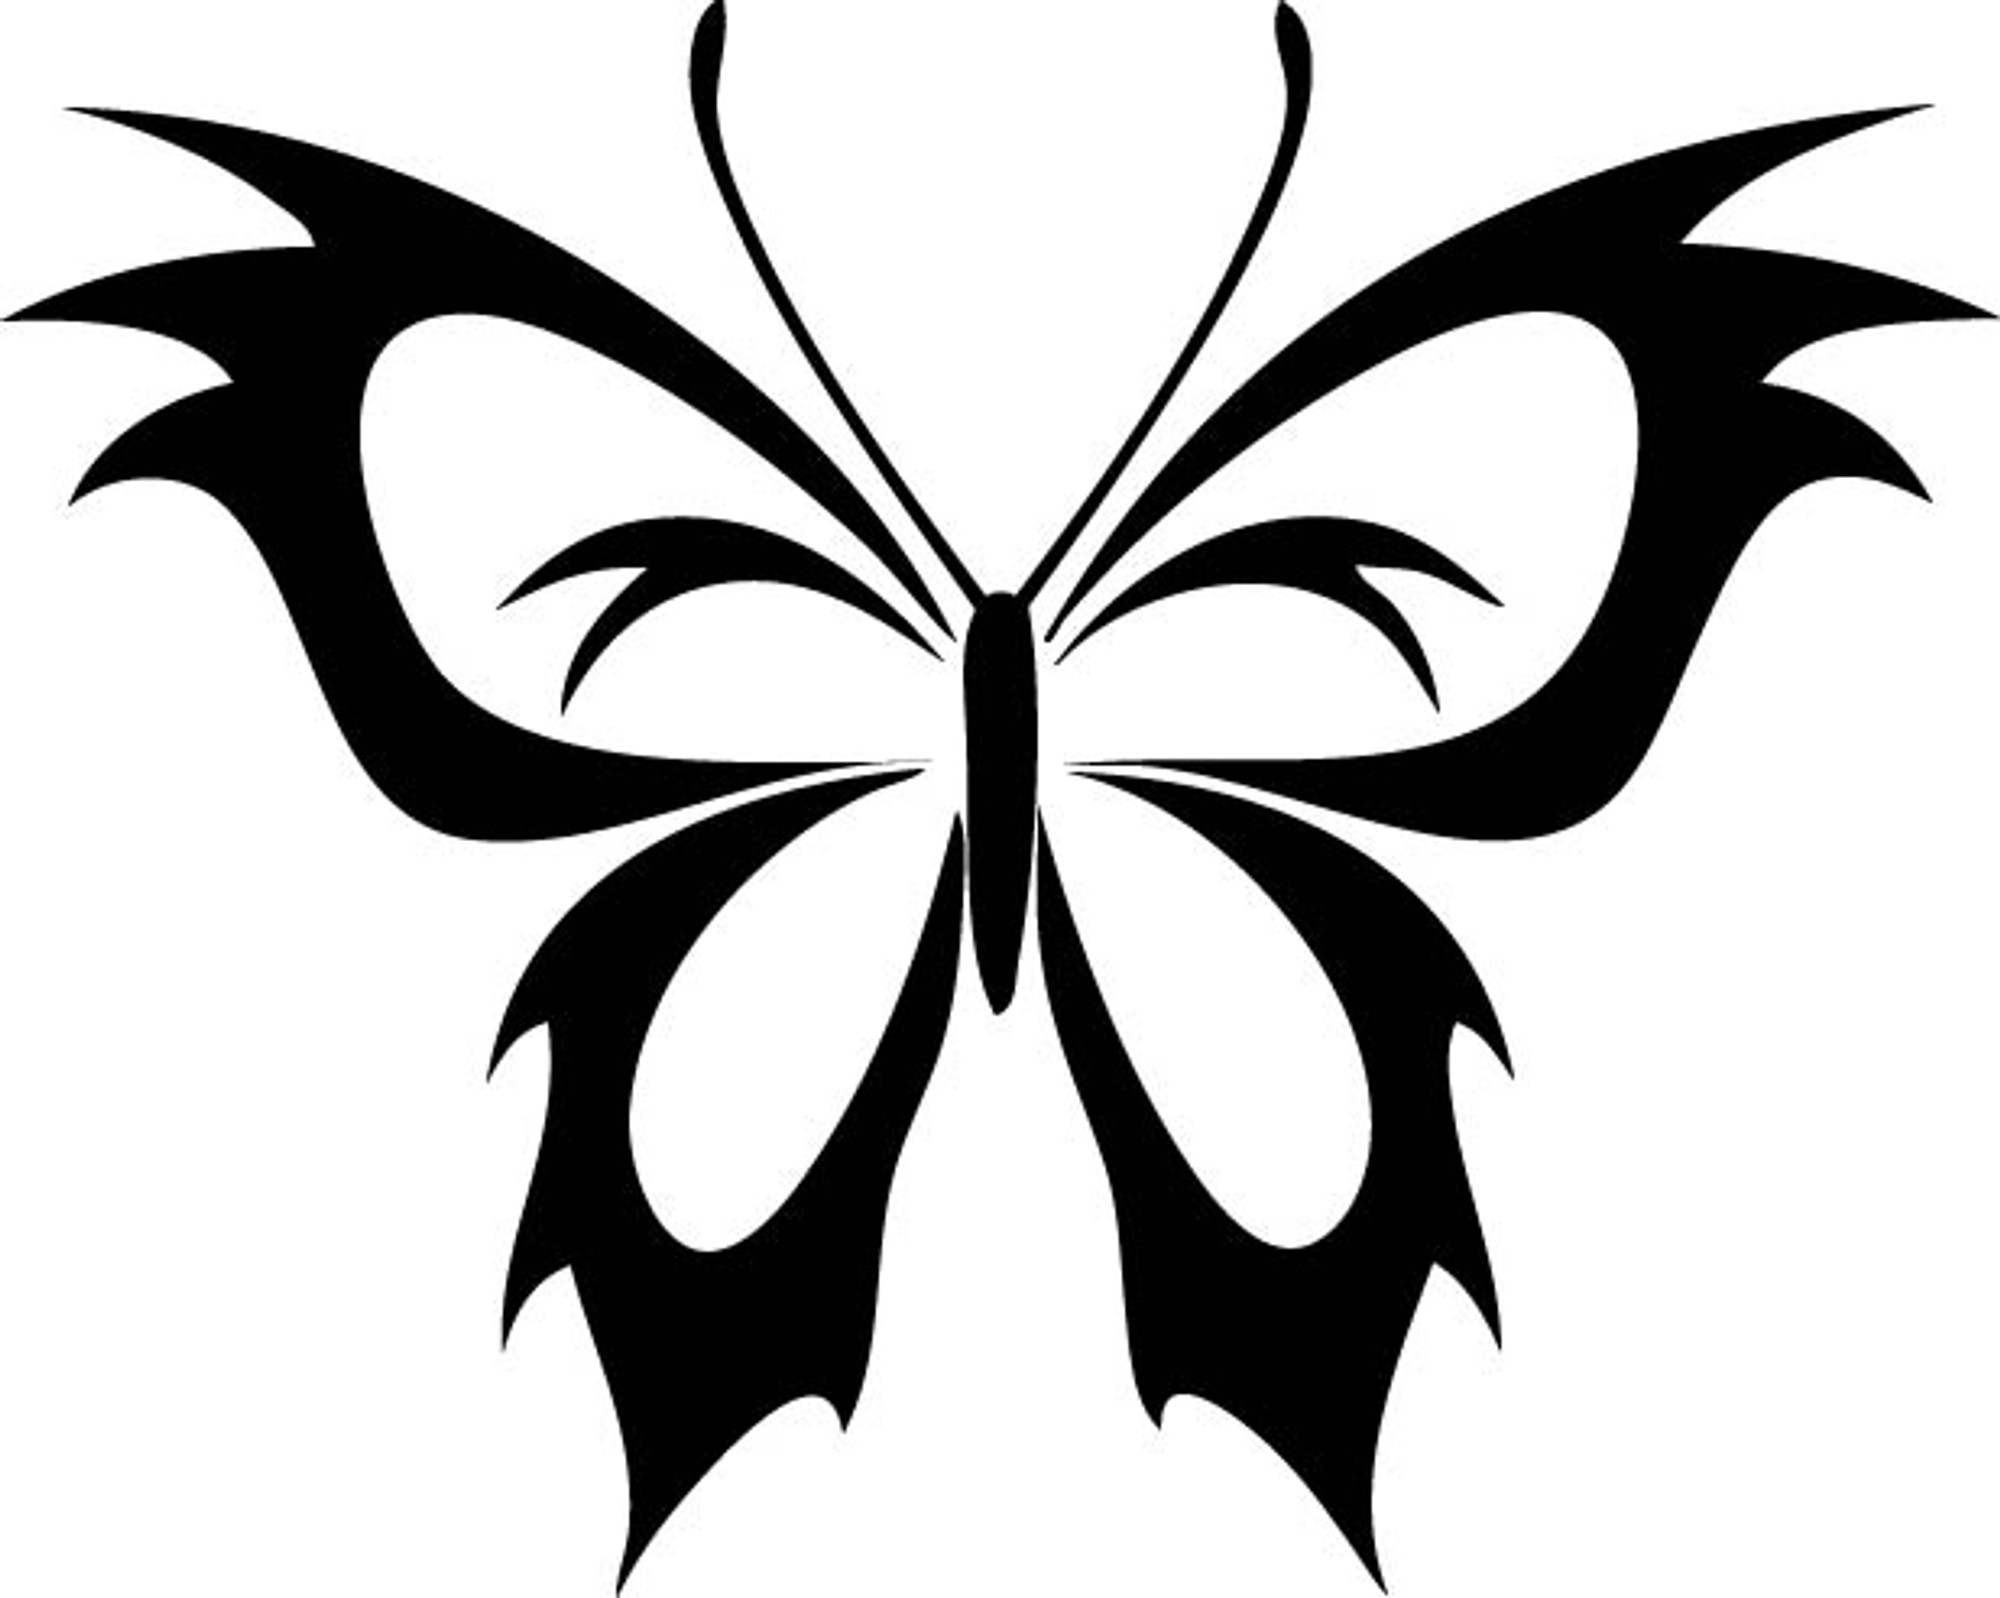 Insect Car Decals - Car Stickers | Butterfly Car Decal 12 | AnyDecals.com